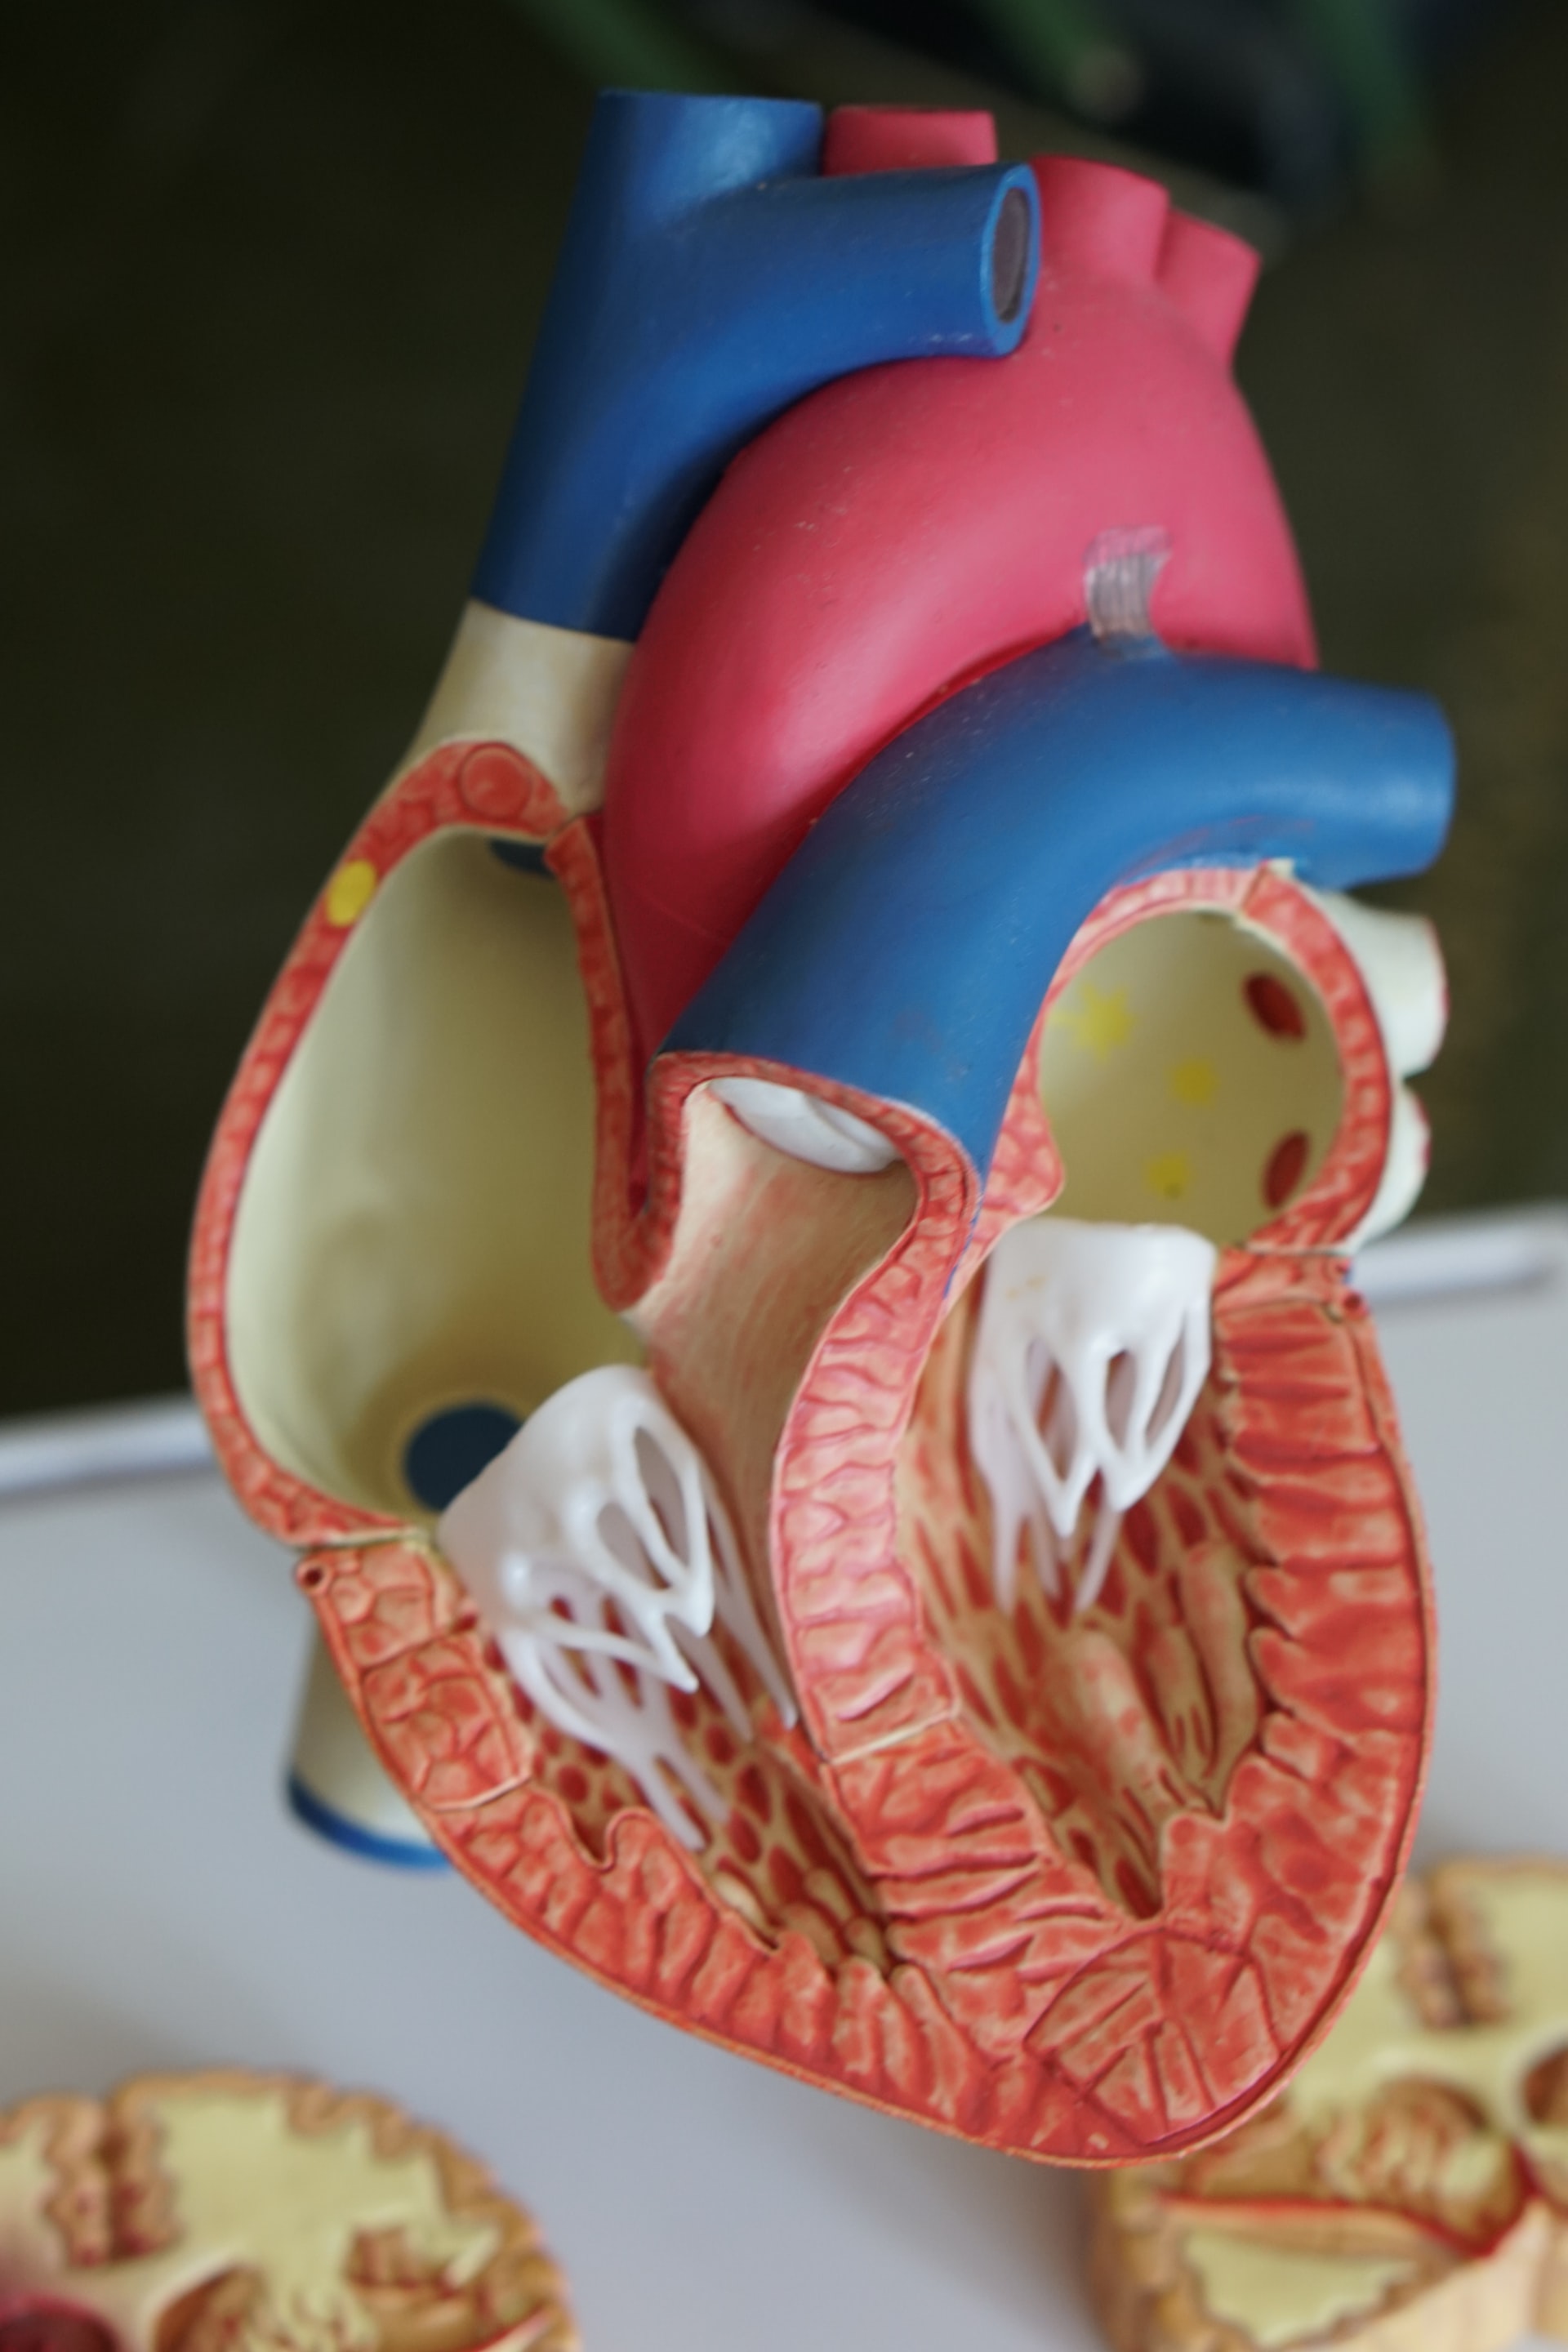 Model of the interior structure of the human heart